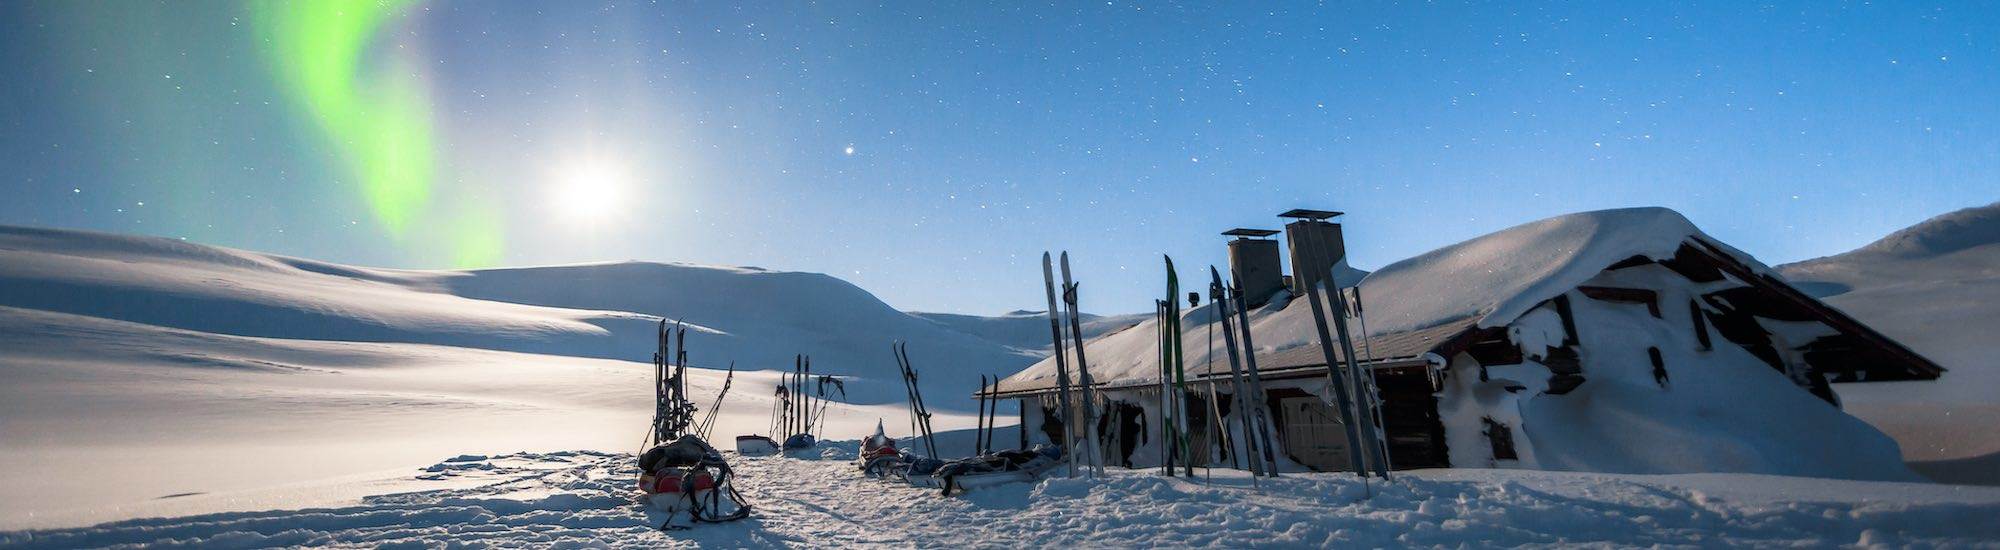 Lapland, inc. flights and accommodation with breakfast